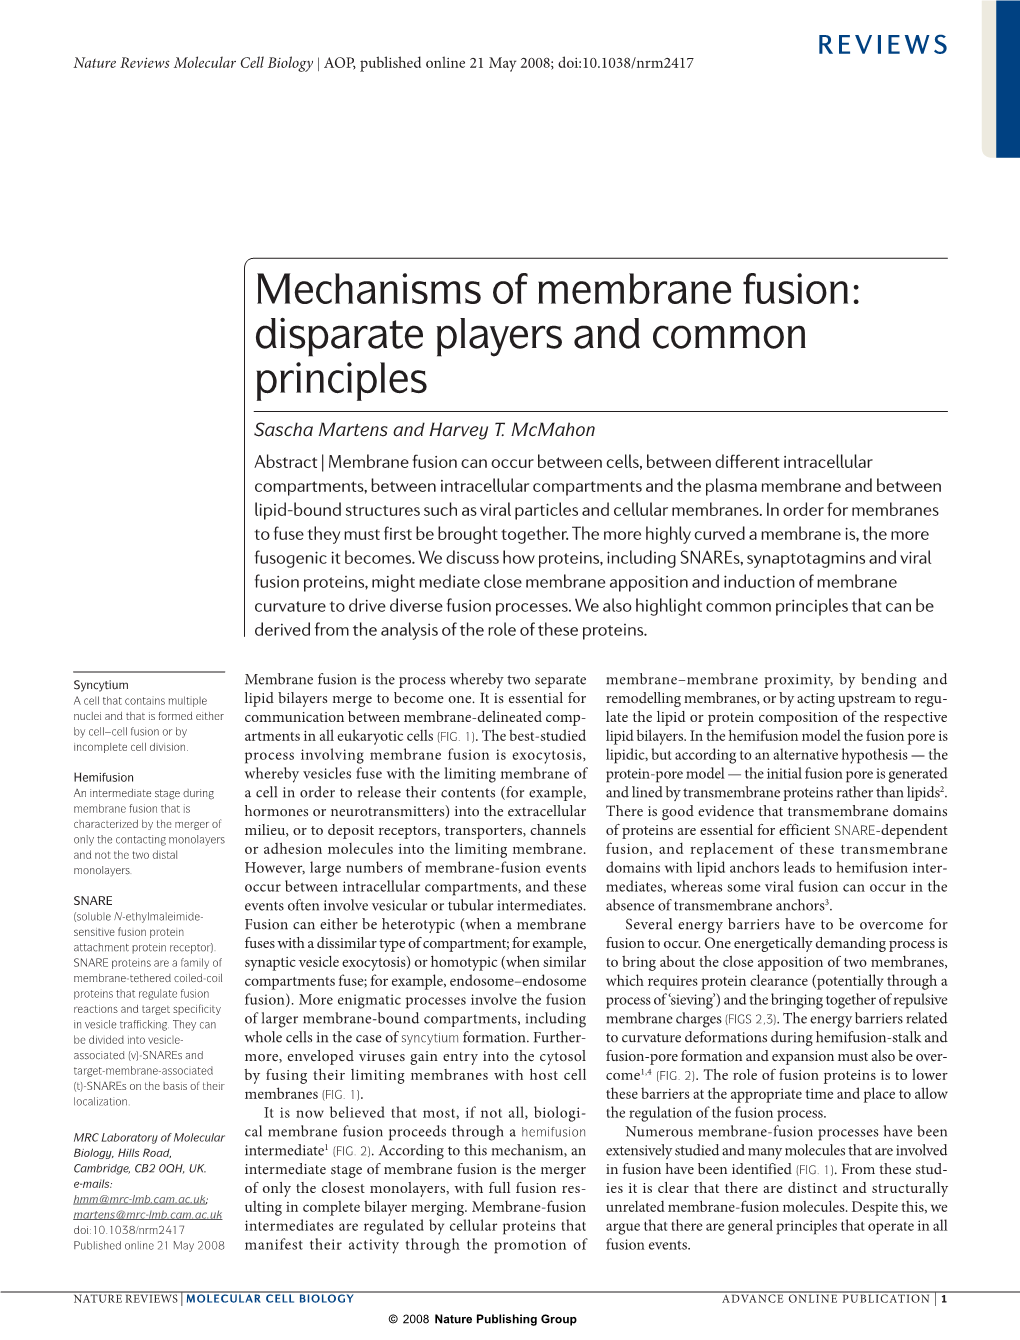 Mechanisms of Membrane Fusion: Disparate Players and Common Principles